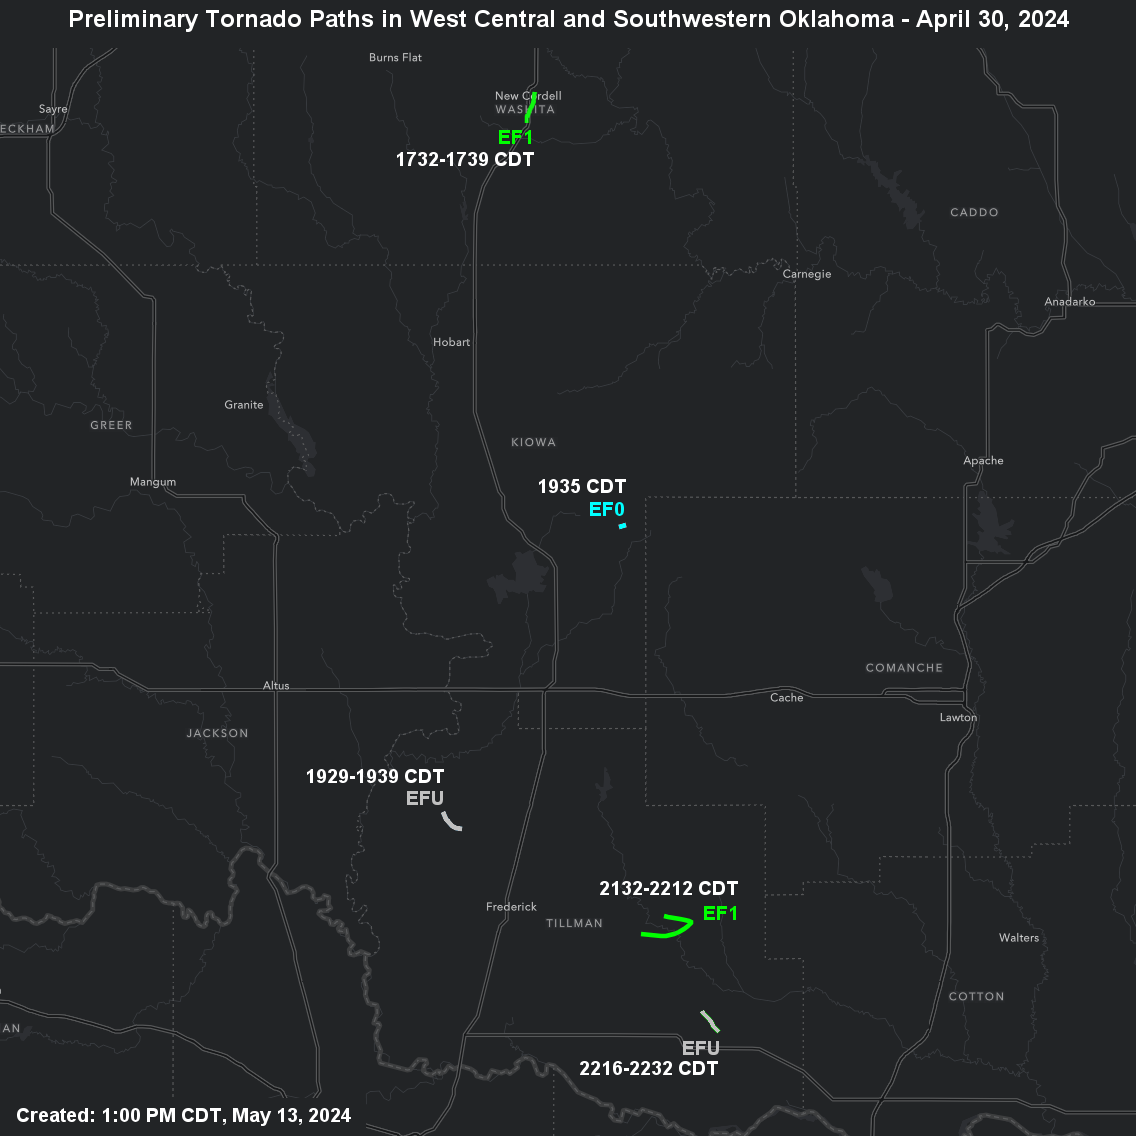 Preliminary Tornado Damage Paths in the NWS Norman Forecast Area for the April 30, 2024 Severe Weather Event